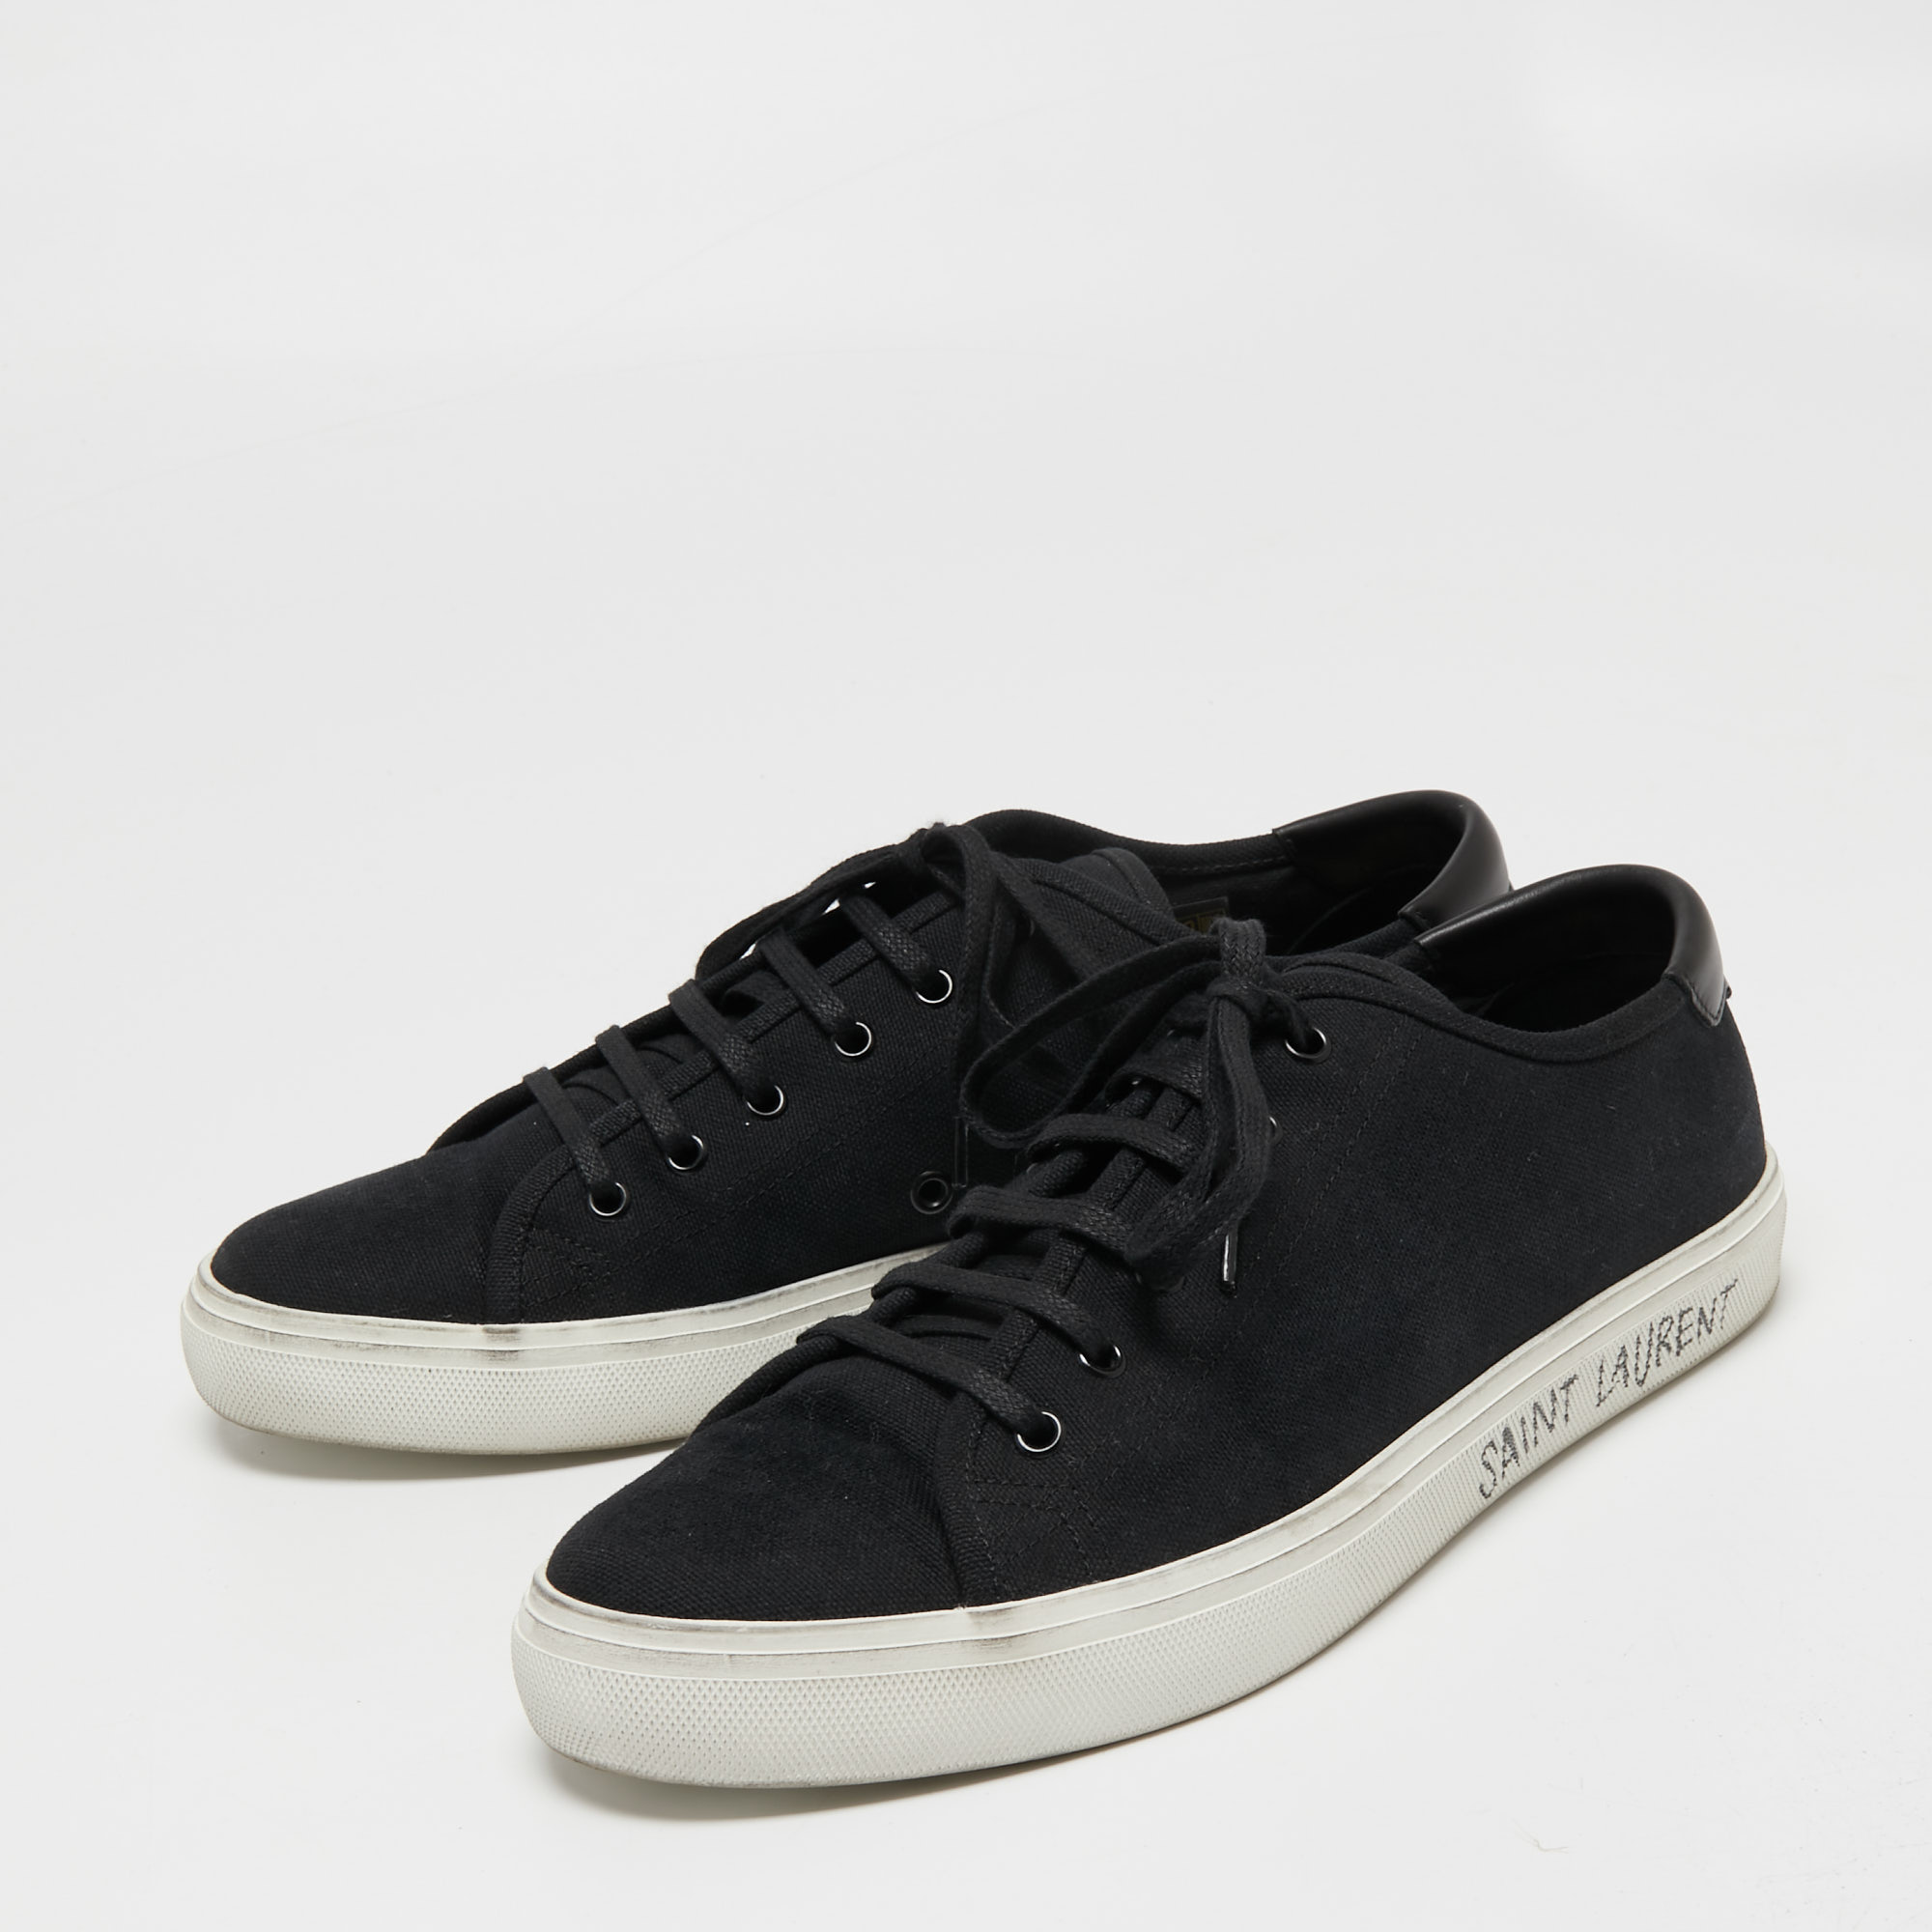 

Saint Laurent Black Canvas And Leather Malibu Low Top Sneakers Size